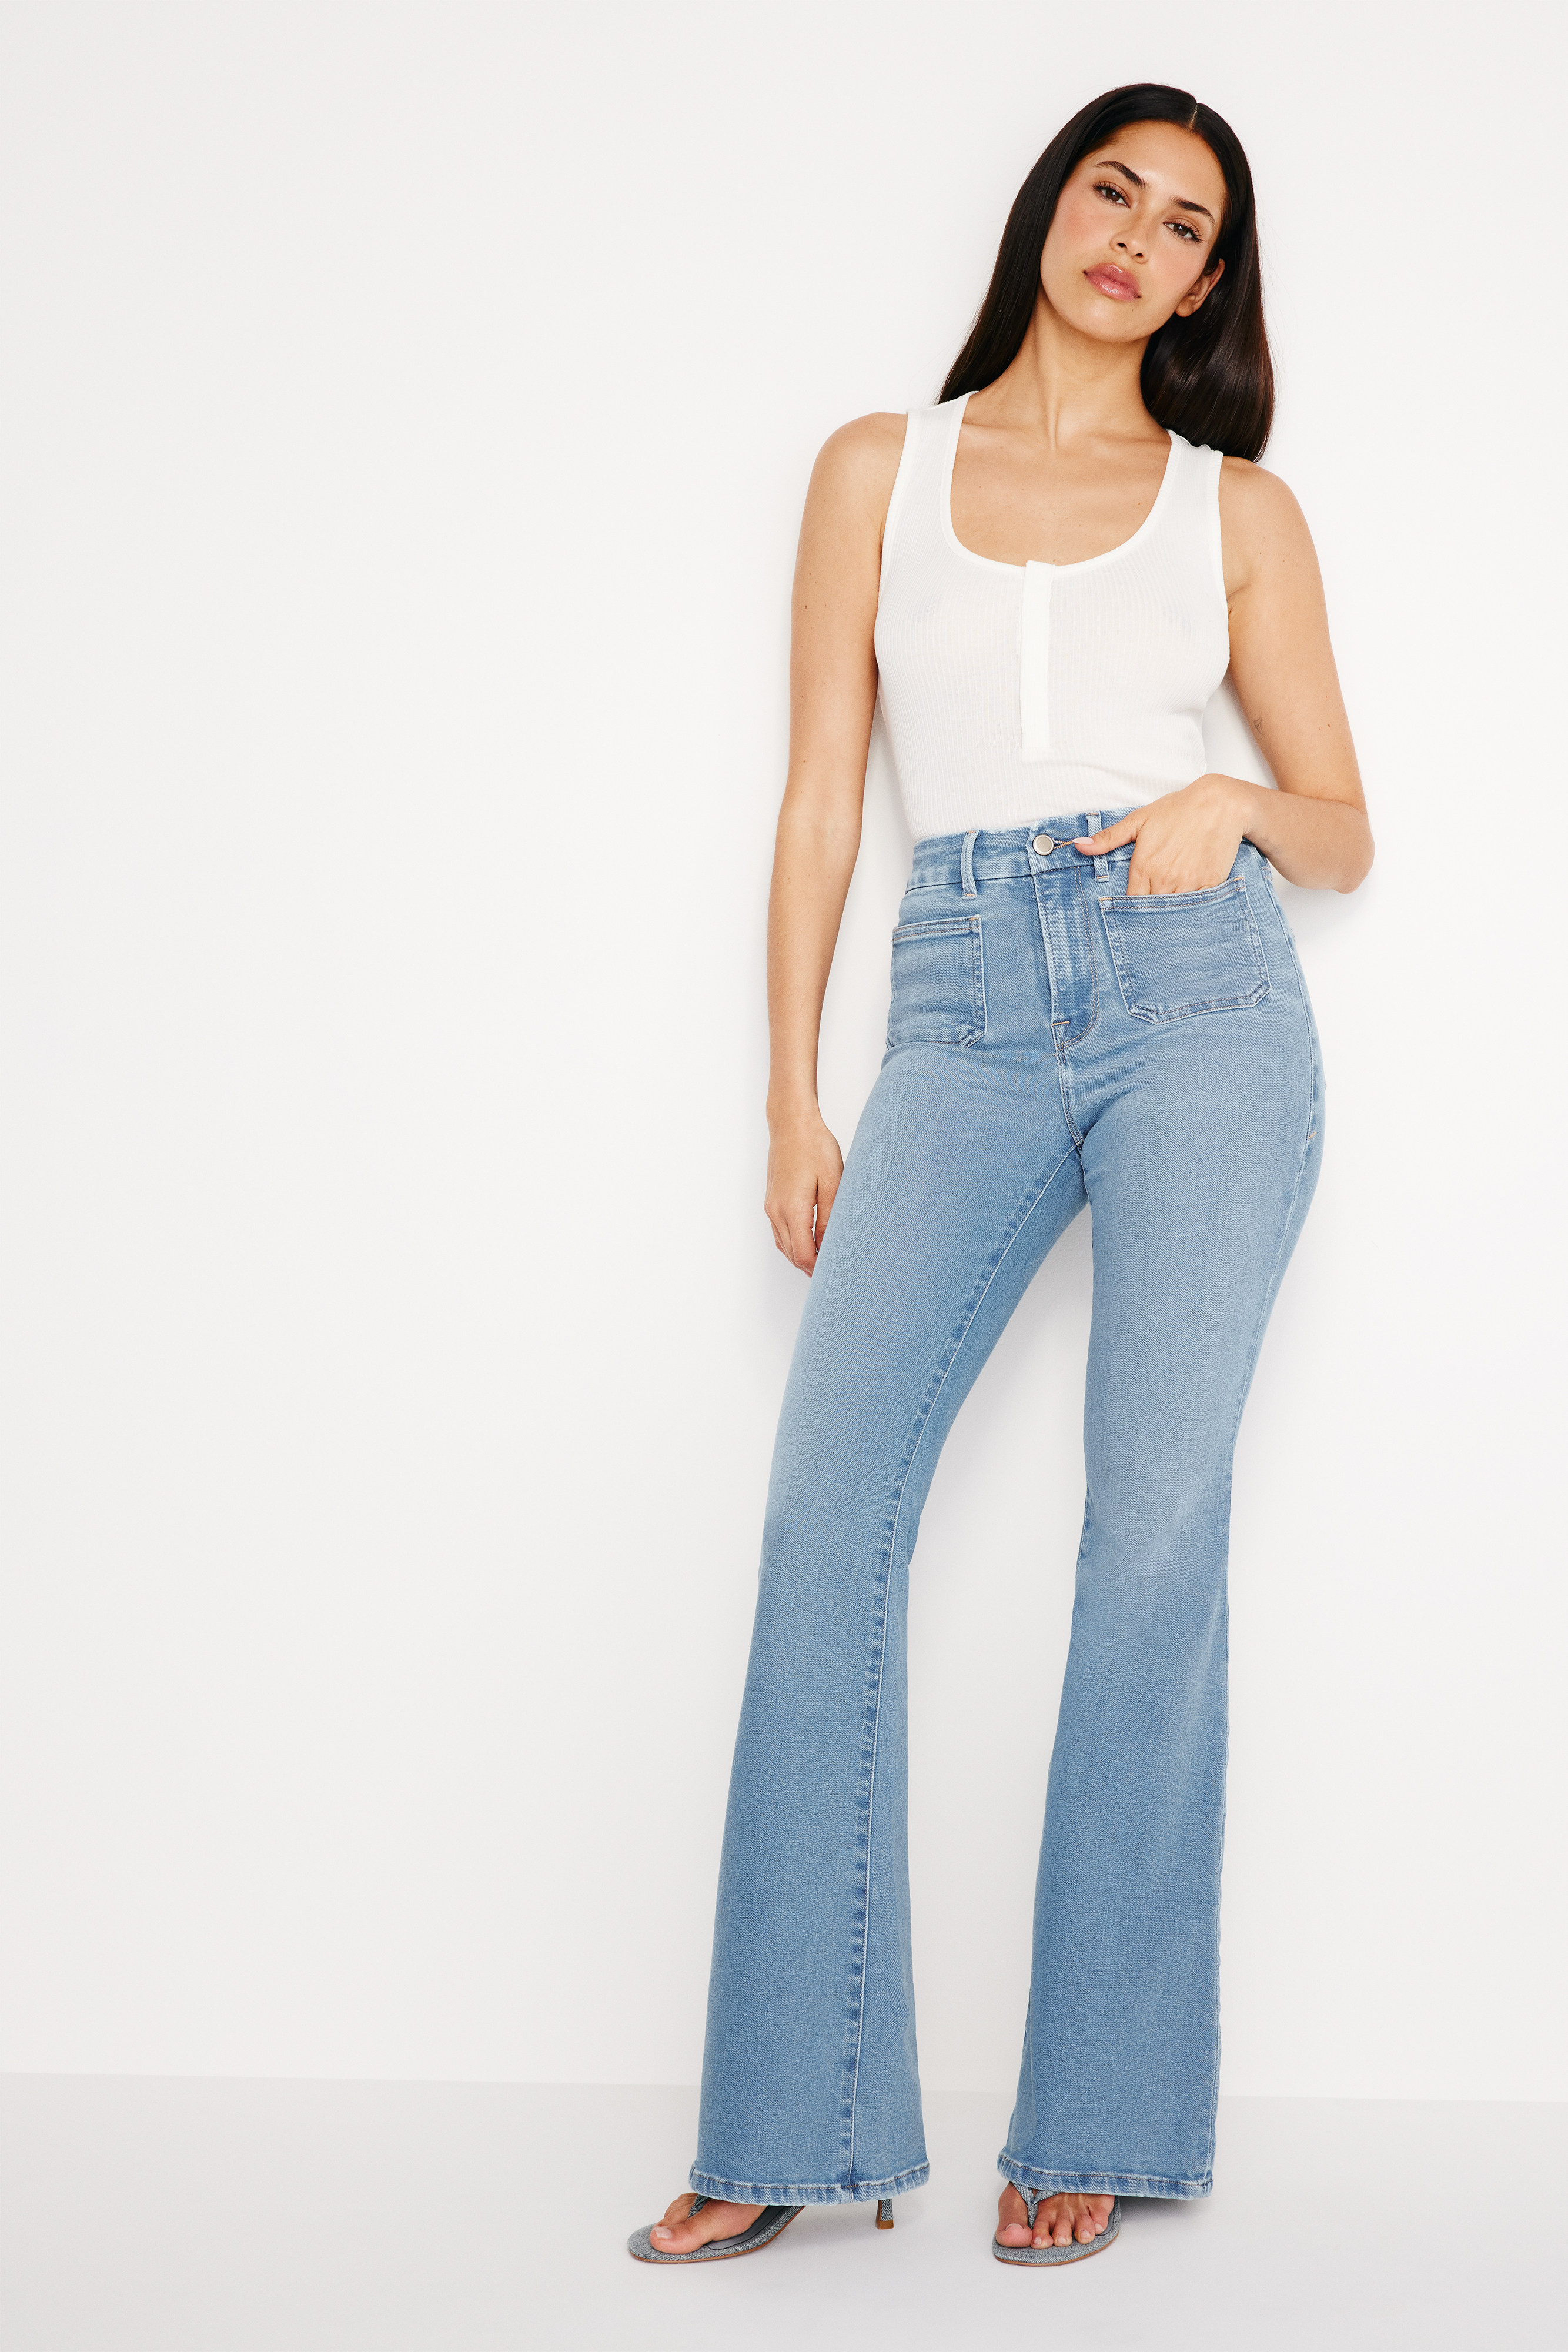 Styled with GOOD LEGS LIGHT COMPRESSION FLARE JEANS | INDIGO656